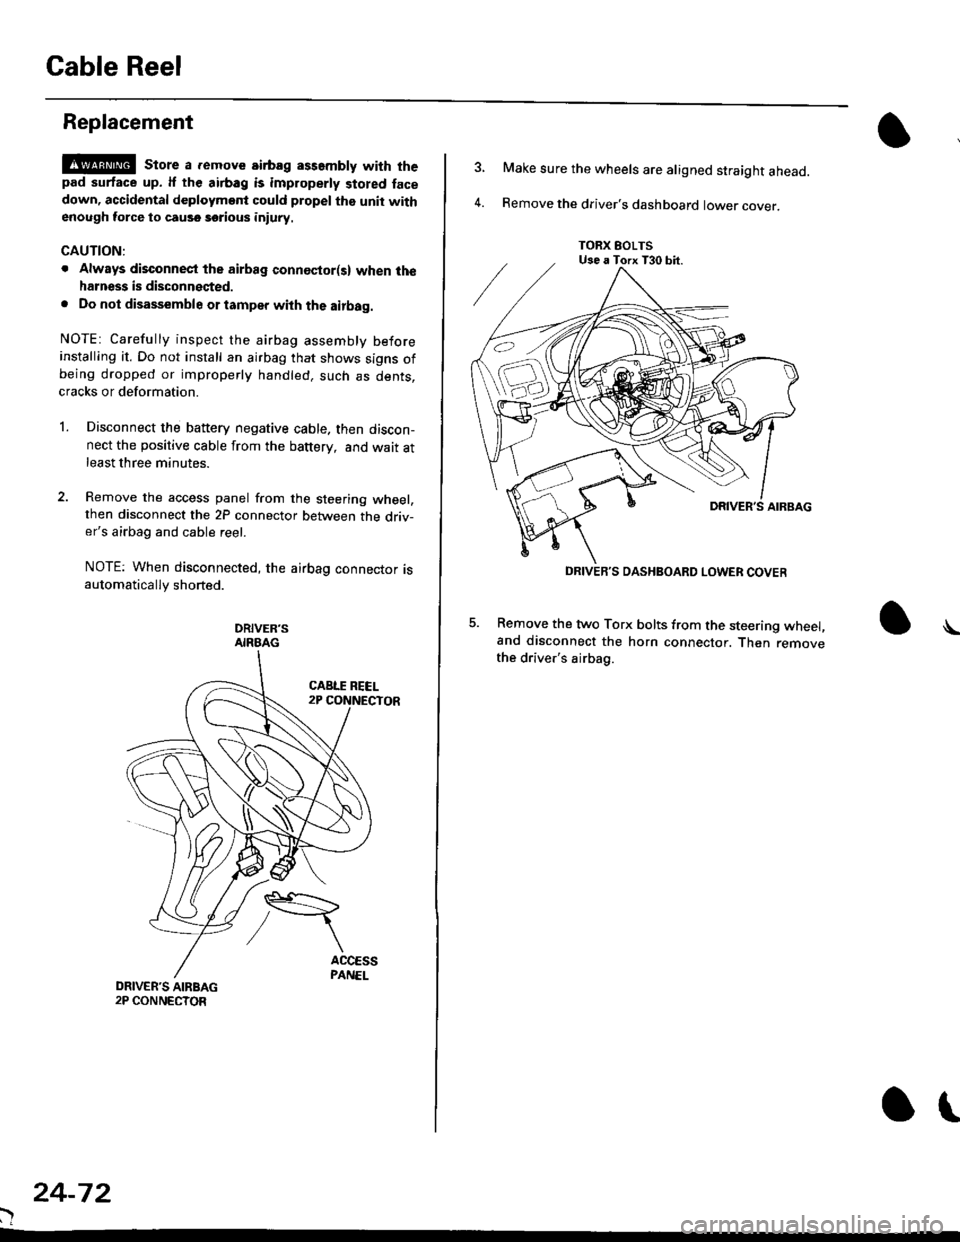 HONDA CIVIC 1996 6.G Repair Manual Gable Reel
Replacement
!@@ store a .emove airbag assambly with thepad surtace up. lf the airbag is improperly stored face
down, accidental deploymont could propel the unit withenough force to cause so